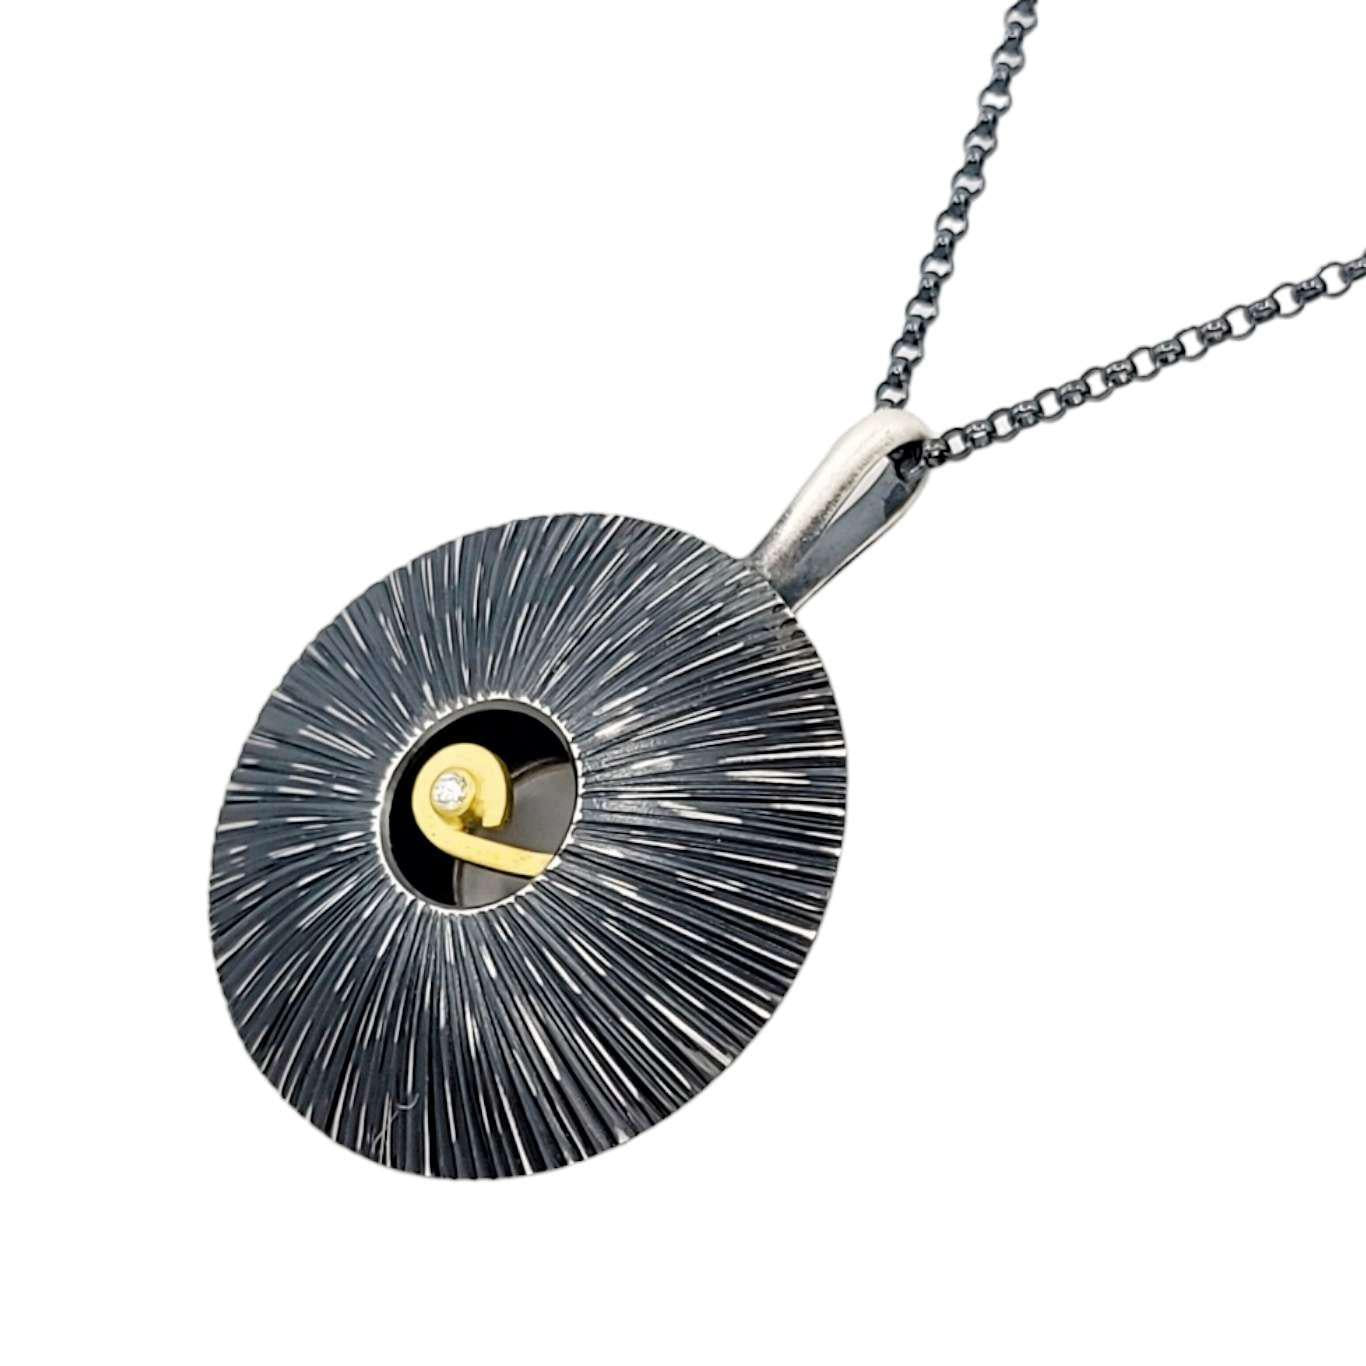 Necklace - OOAK Diamond Swirl Pendant in Sterling Silver and 18k Gold by Susan Mahlstedt